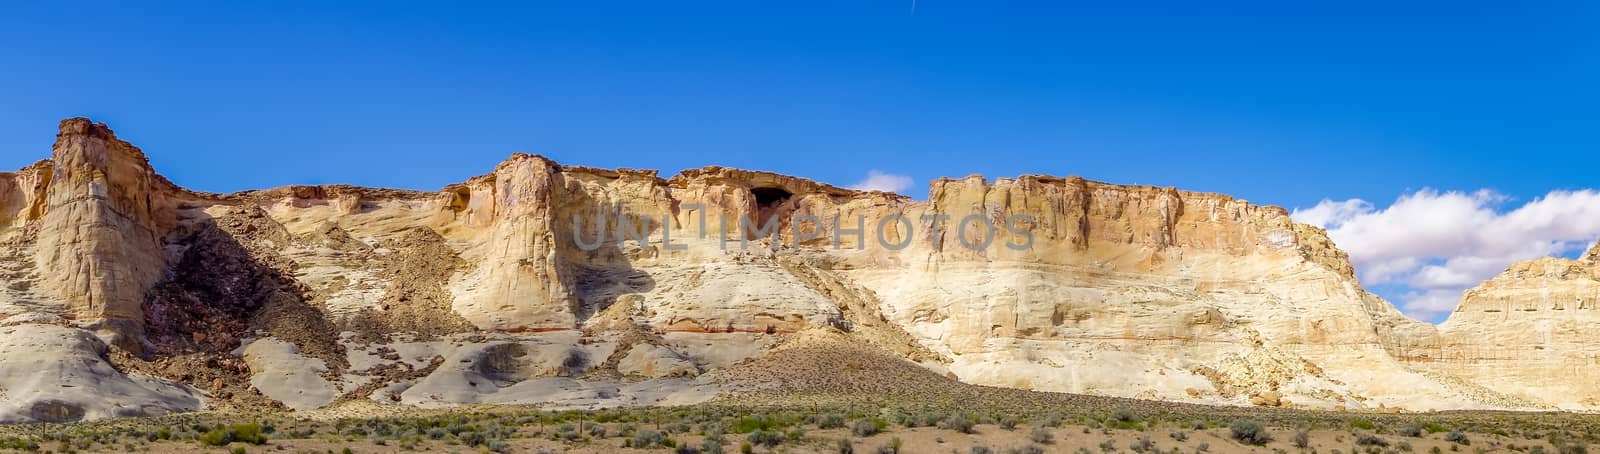 landscape scenes near lake powell and surrounding canyons by digidreamgrafix